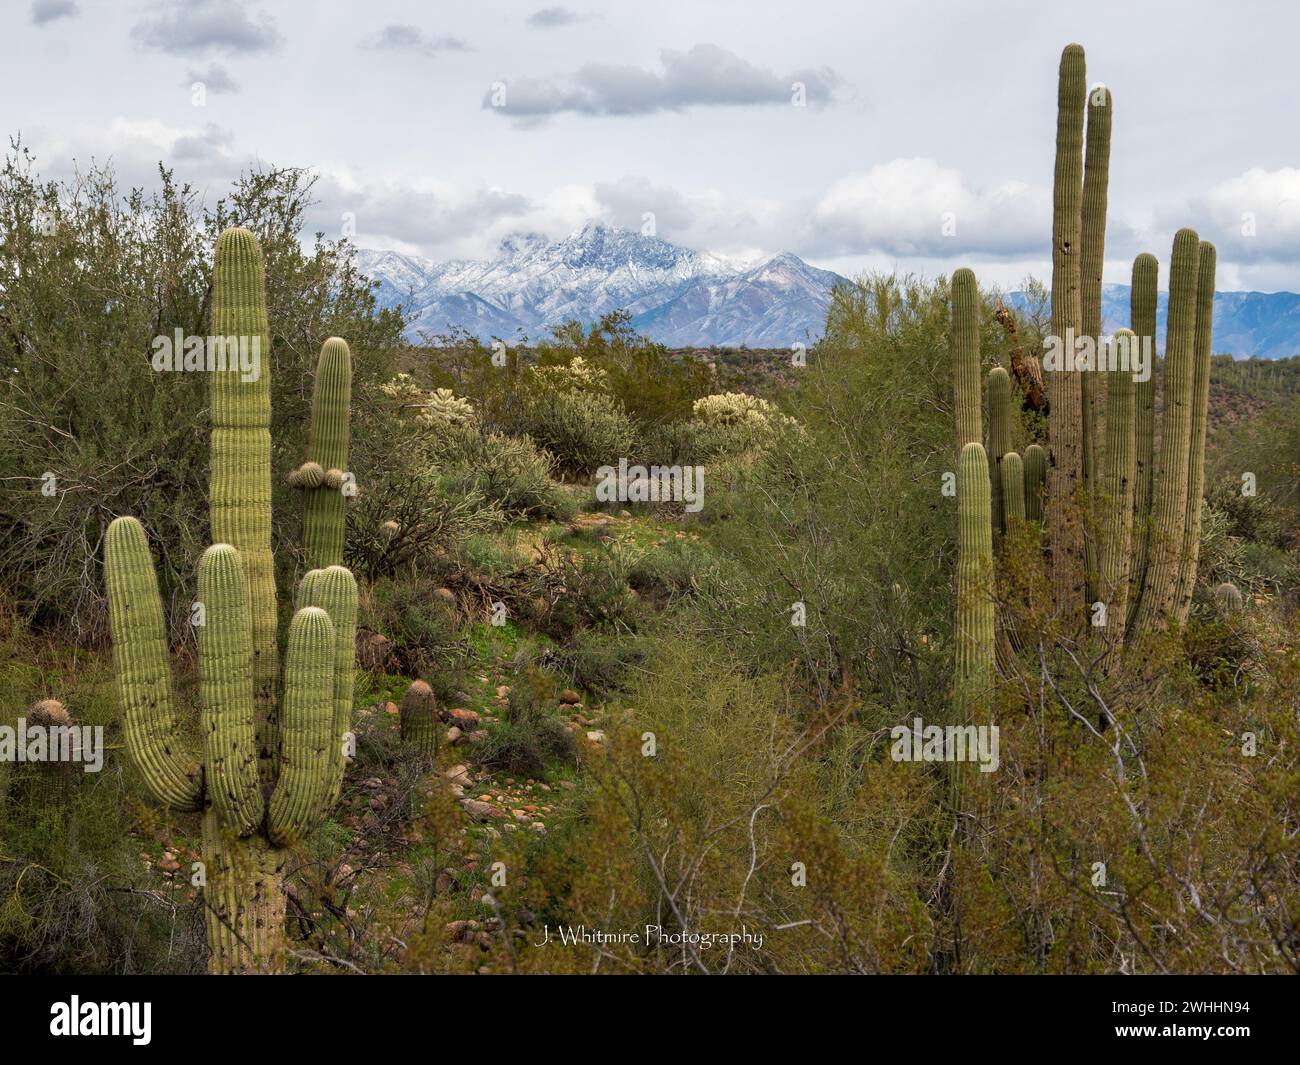 The Sonoran desert in winter offers cooler weather to the Phoenix, Arizona metro and occasional snowfall on surrounding peaks. Stock Photo